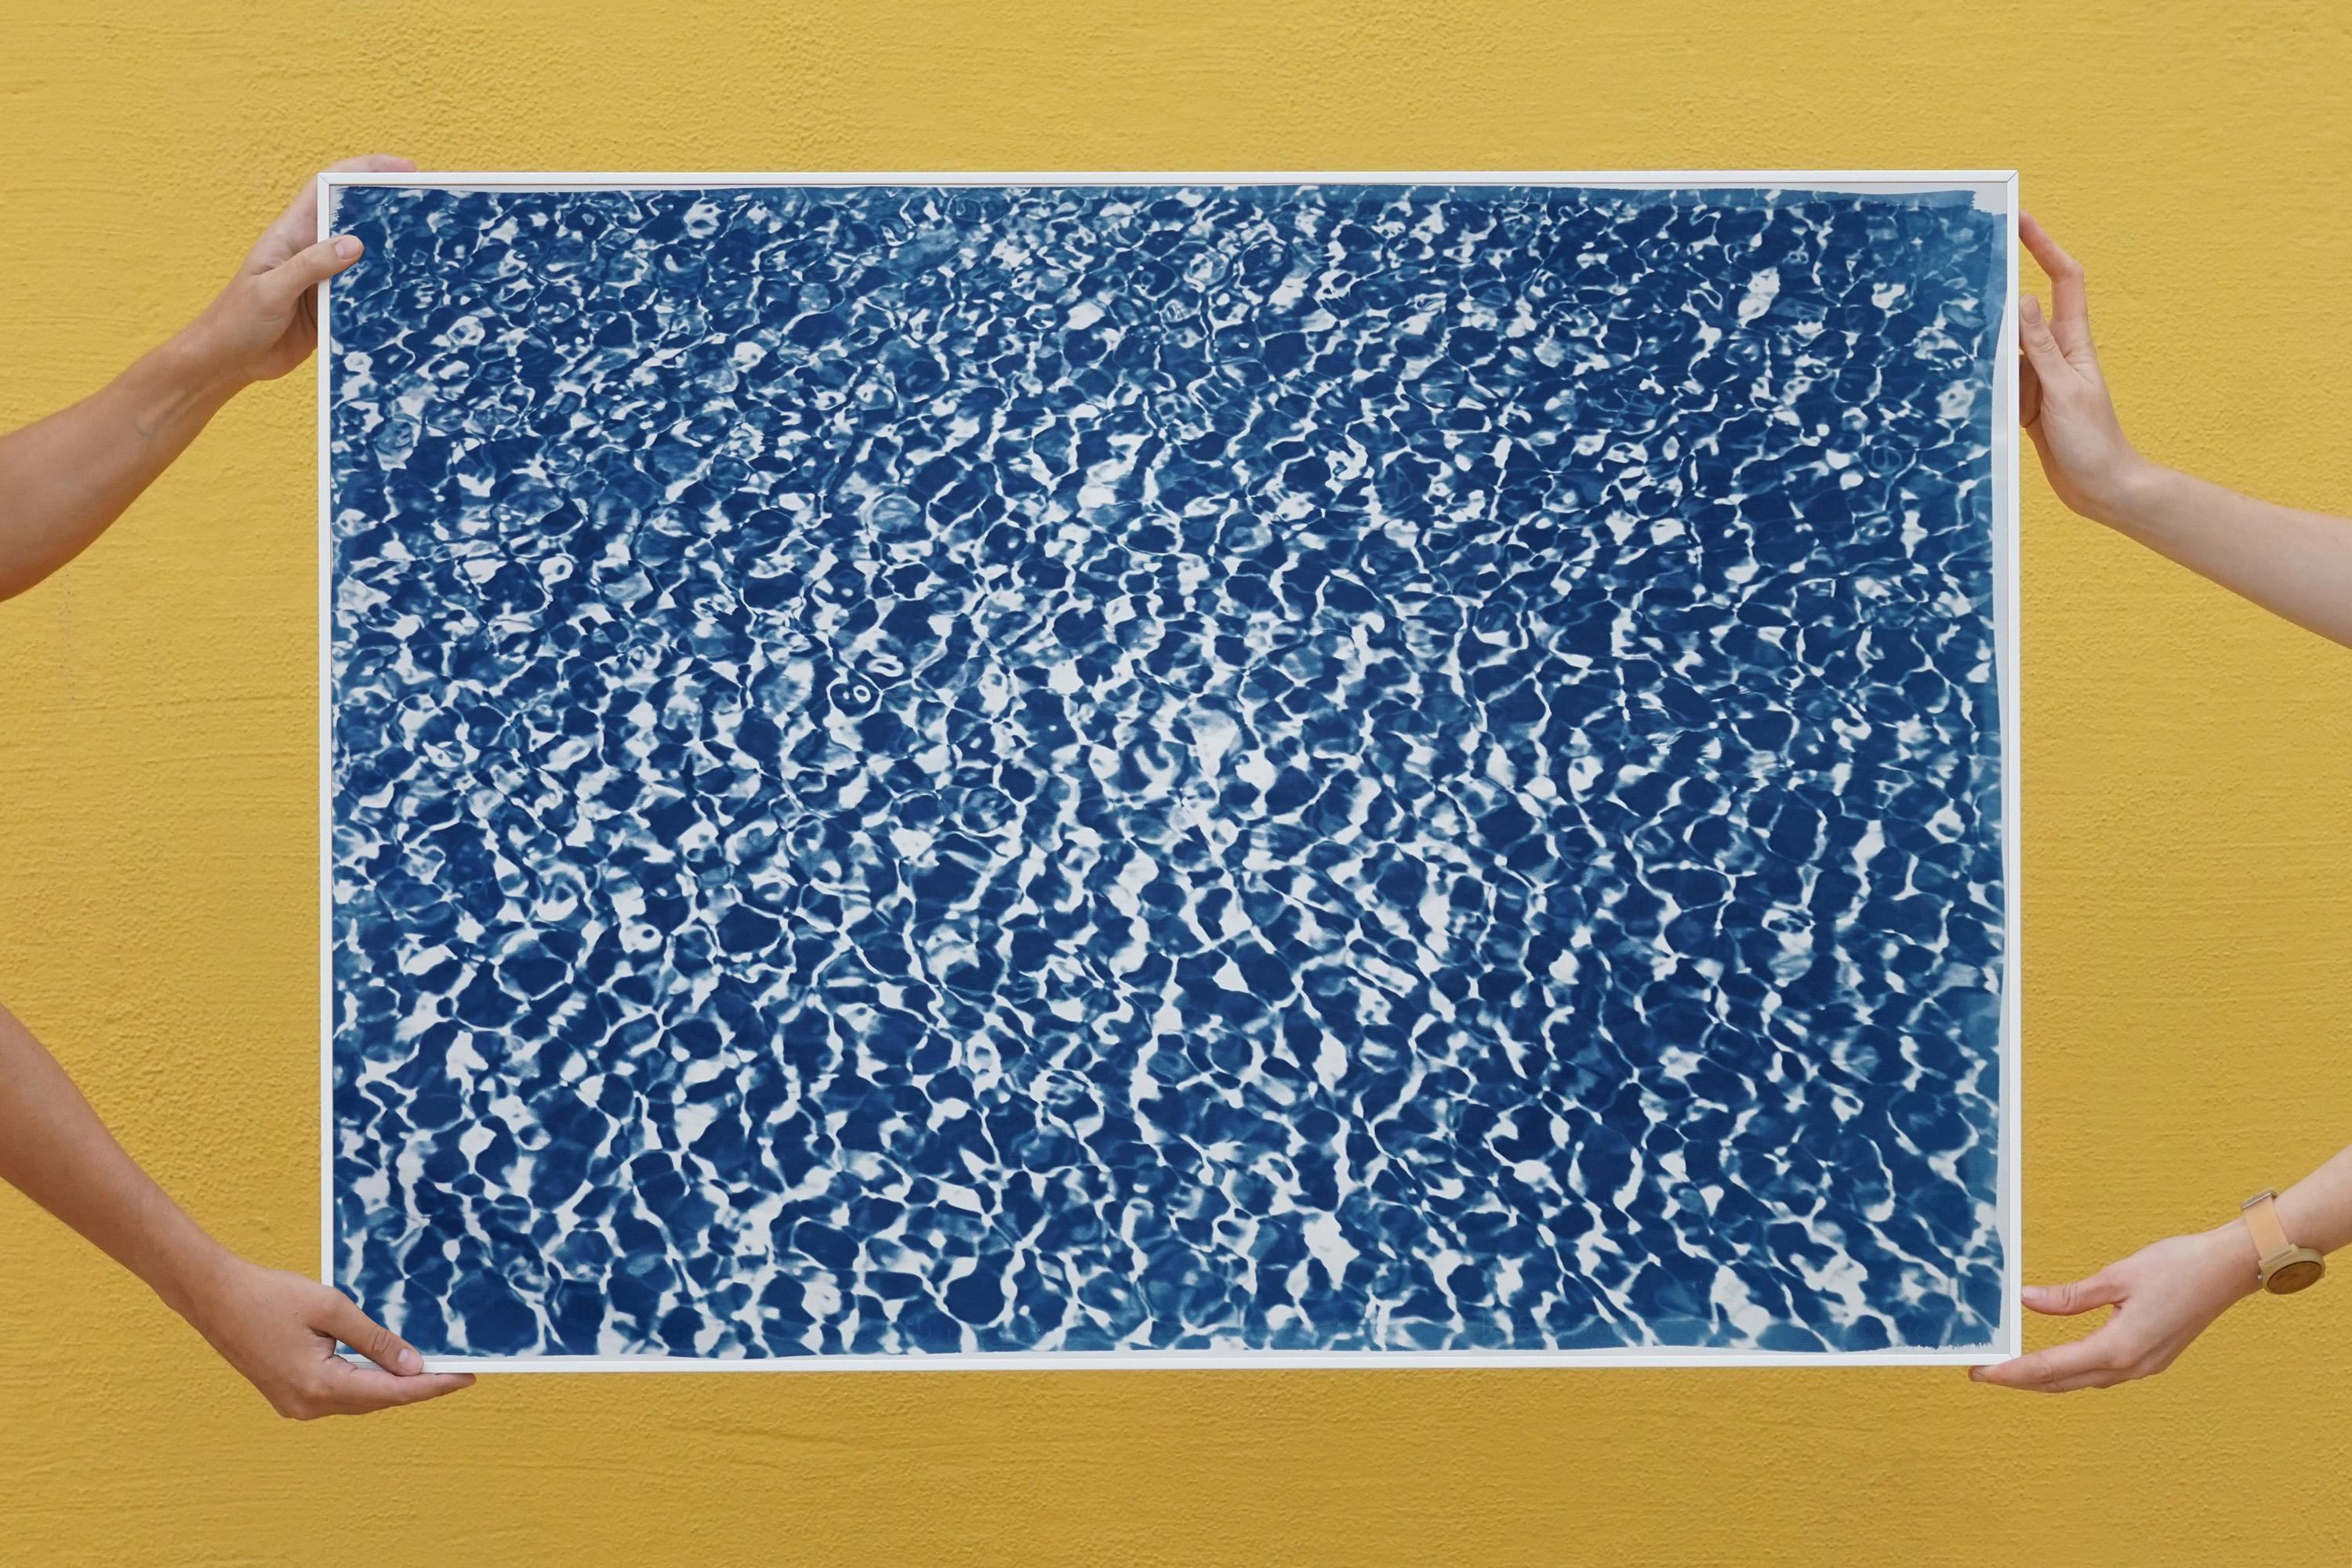 Infinity Pool, Cyanotype on Watercolor Paper, 100x70cm, Blue Abstract Art 2